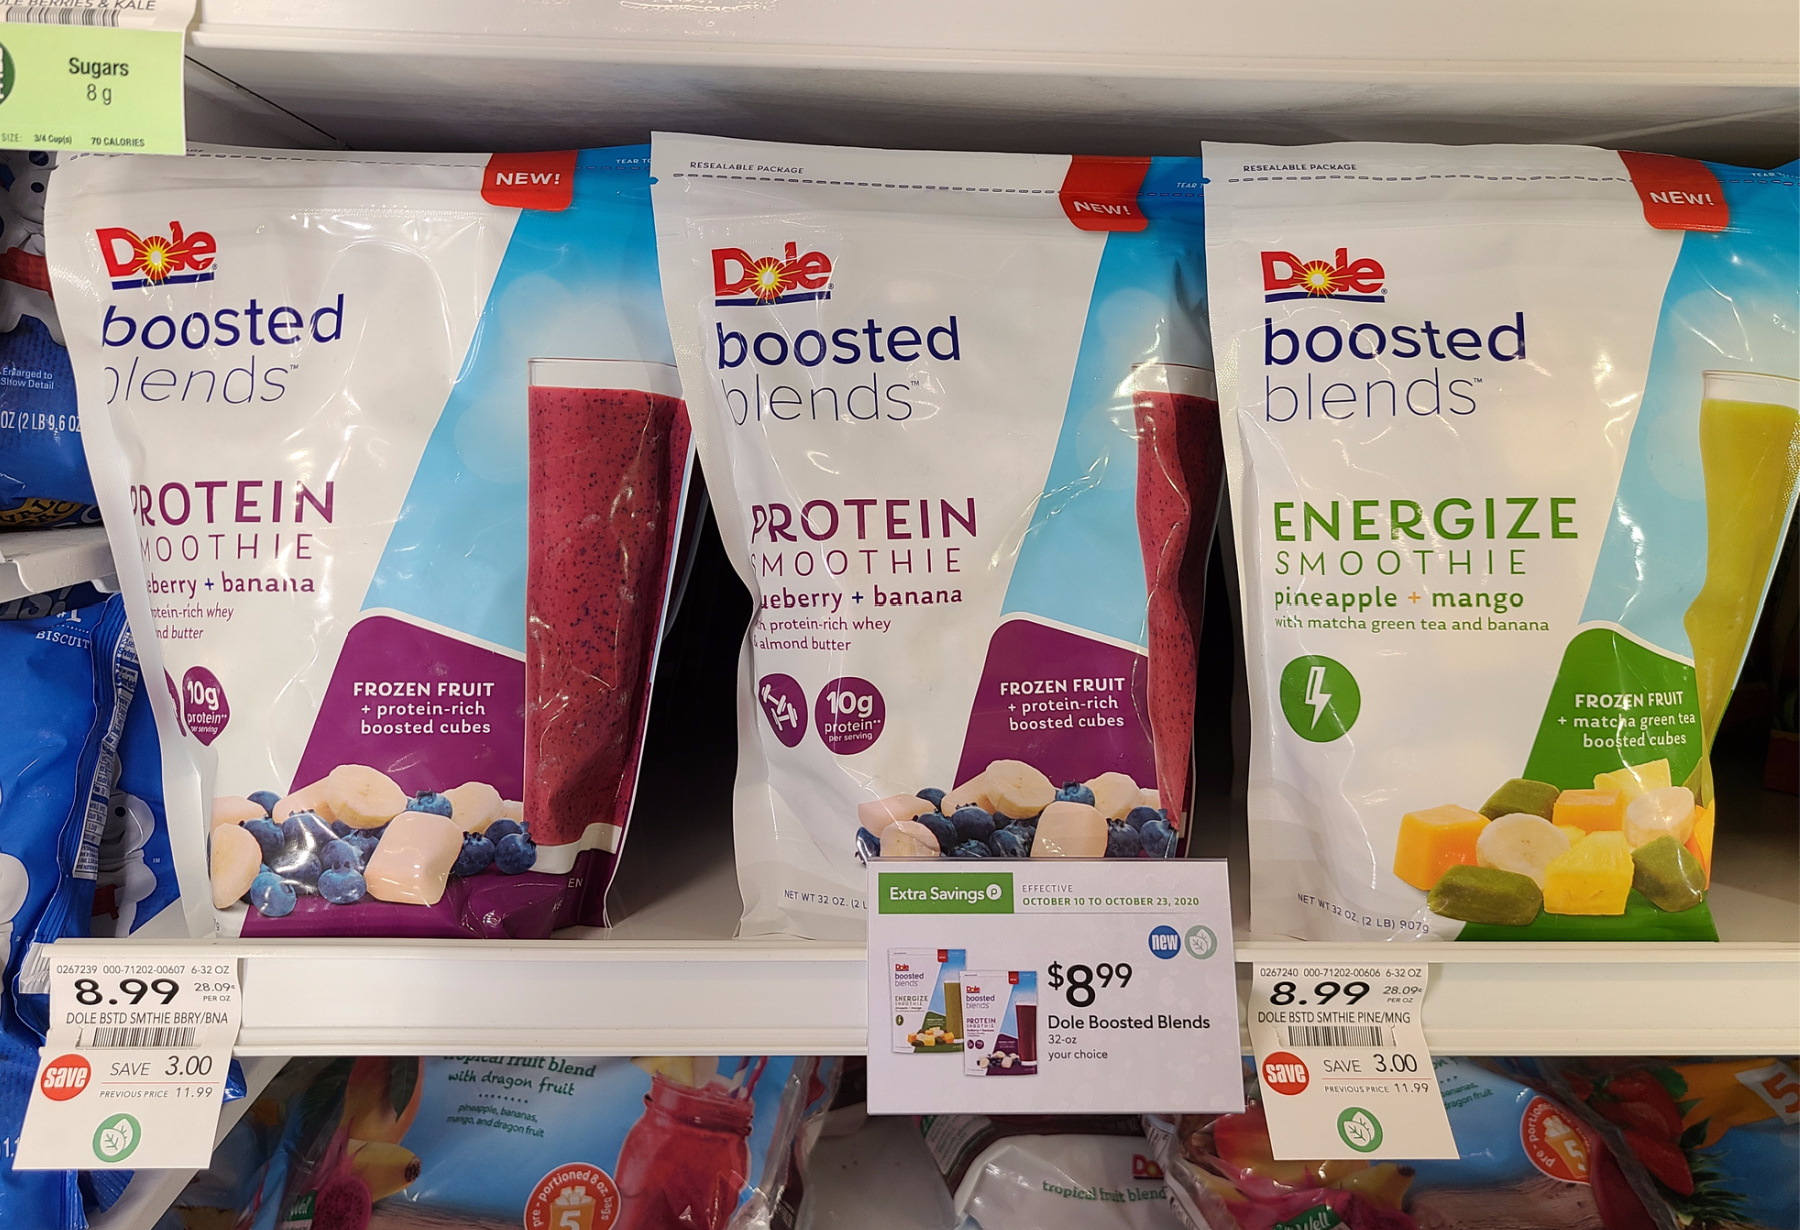 Find Delicious Dole Boosted Blends™ Smoothies With the Frozen Fruit at Publix on I Heart Publix 1